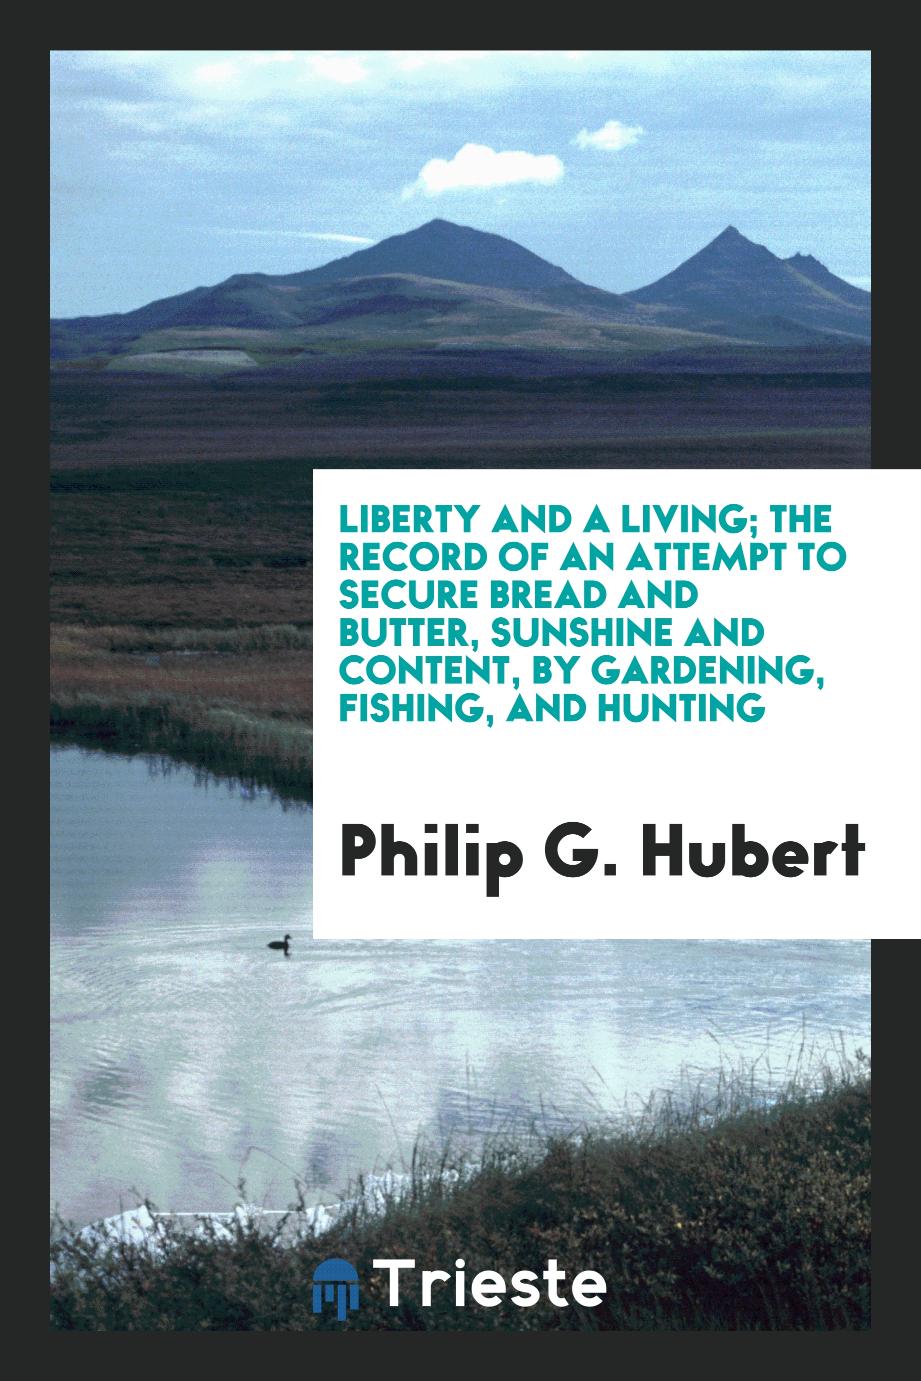 Liberty and a living; the record of an attempt to secure bread and butter, sunshine and content, by gardening, fishing, and hunting